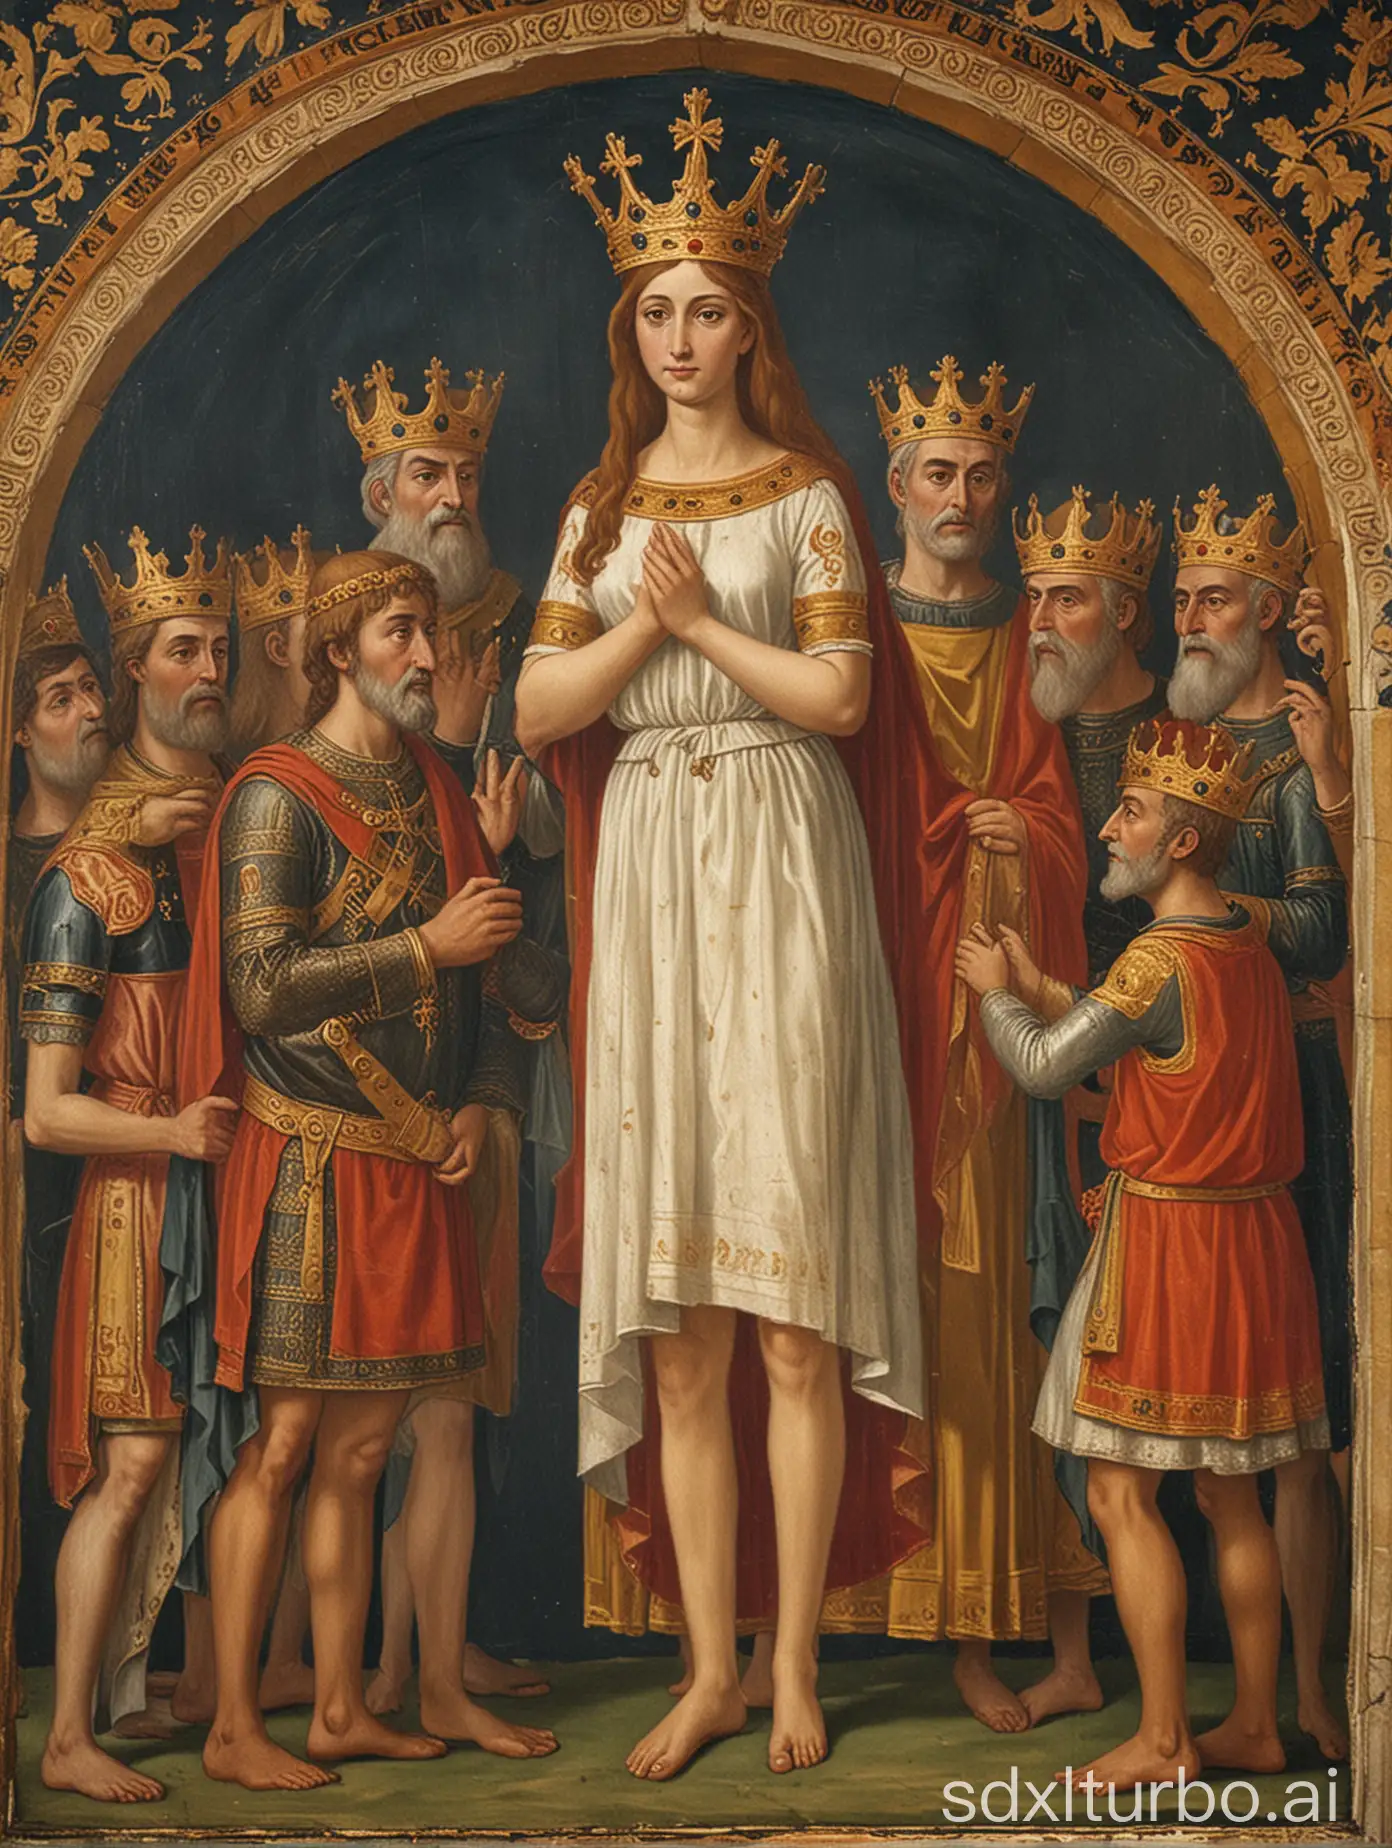 a painting from the 9th century, a woman in a mini skirt assists at the crowning of charlemagne